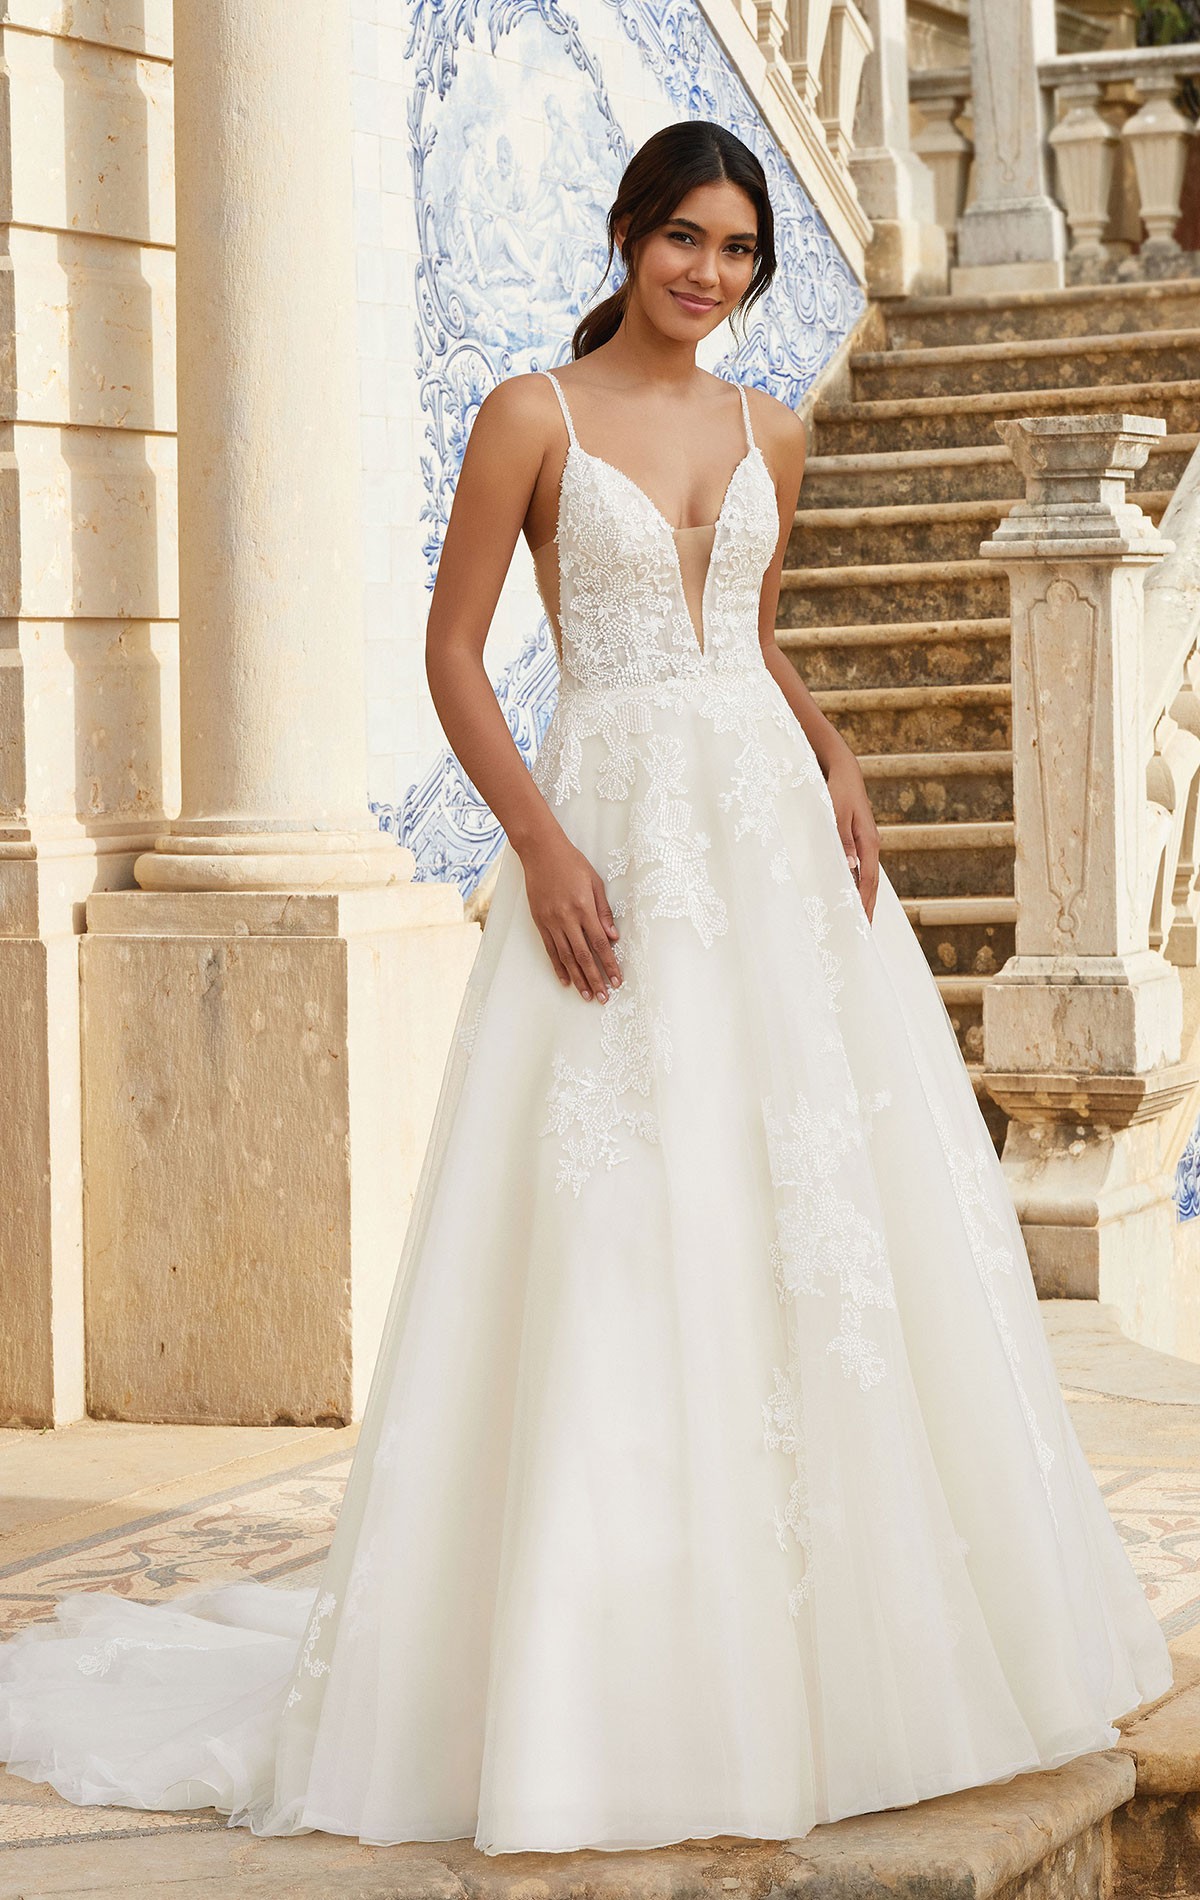 44108 - Gigi size 12 - Justin Alexander Sincerity Bridal Dress 44108, Tulle & Lace Aline dress with beaded spaghetti straps. Now on Sale at Blessings Bridal, Brighton E. Sussex BN1 5GG T: 01273 505766  E:info@blessingsbridal.co.uk